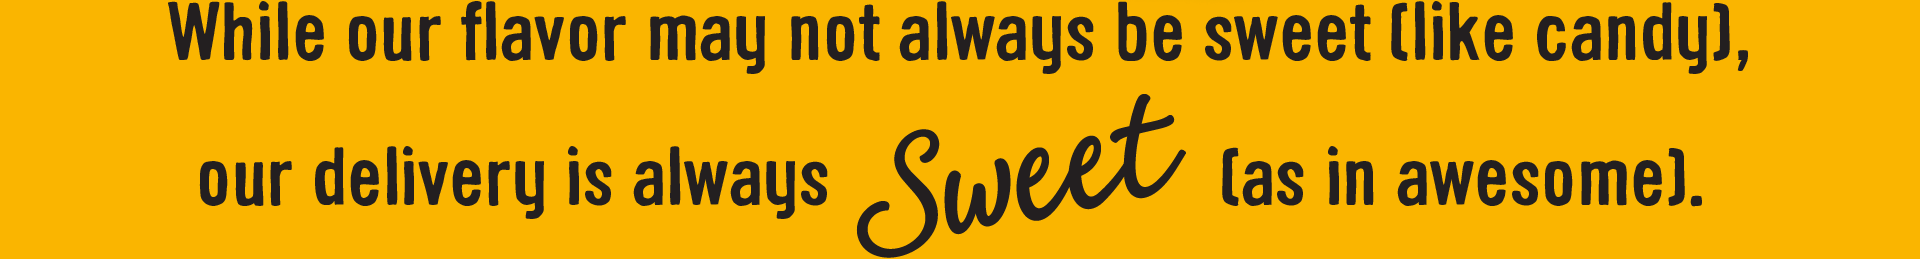 While our flavor may not always be sweet (like candy), our deliver is always Sweet (as in awesome).